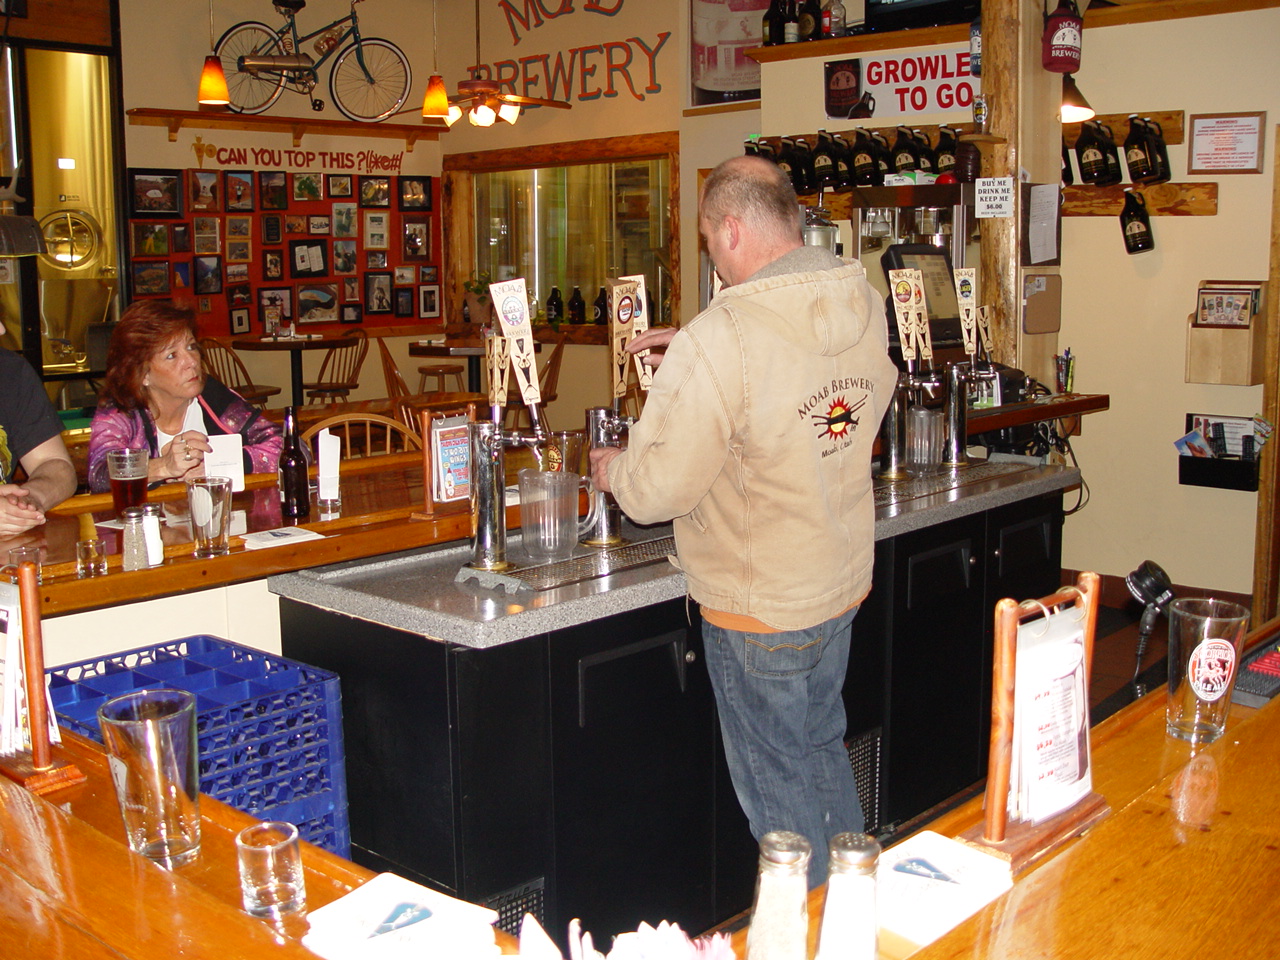 Moab Brewery: A Small-Town Experience with Big Taste